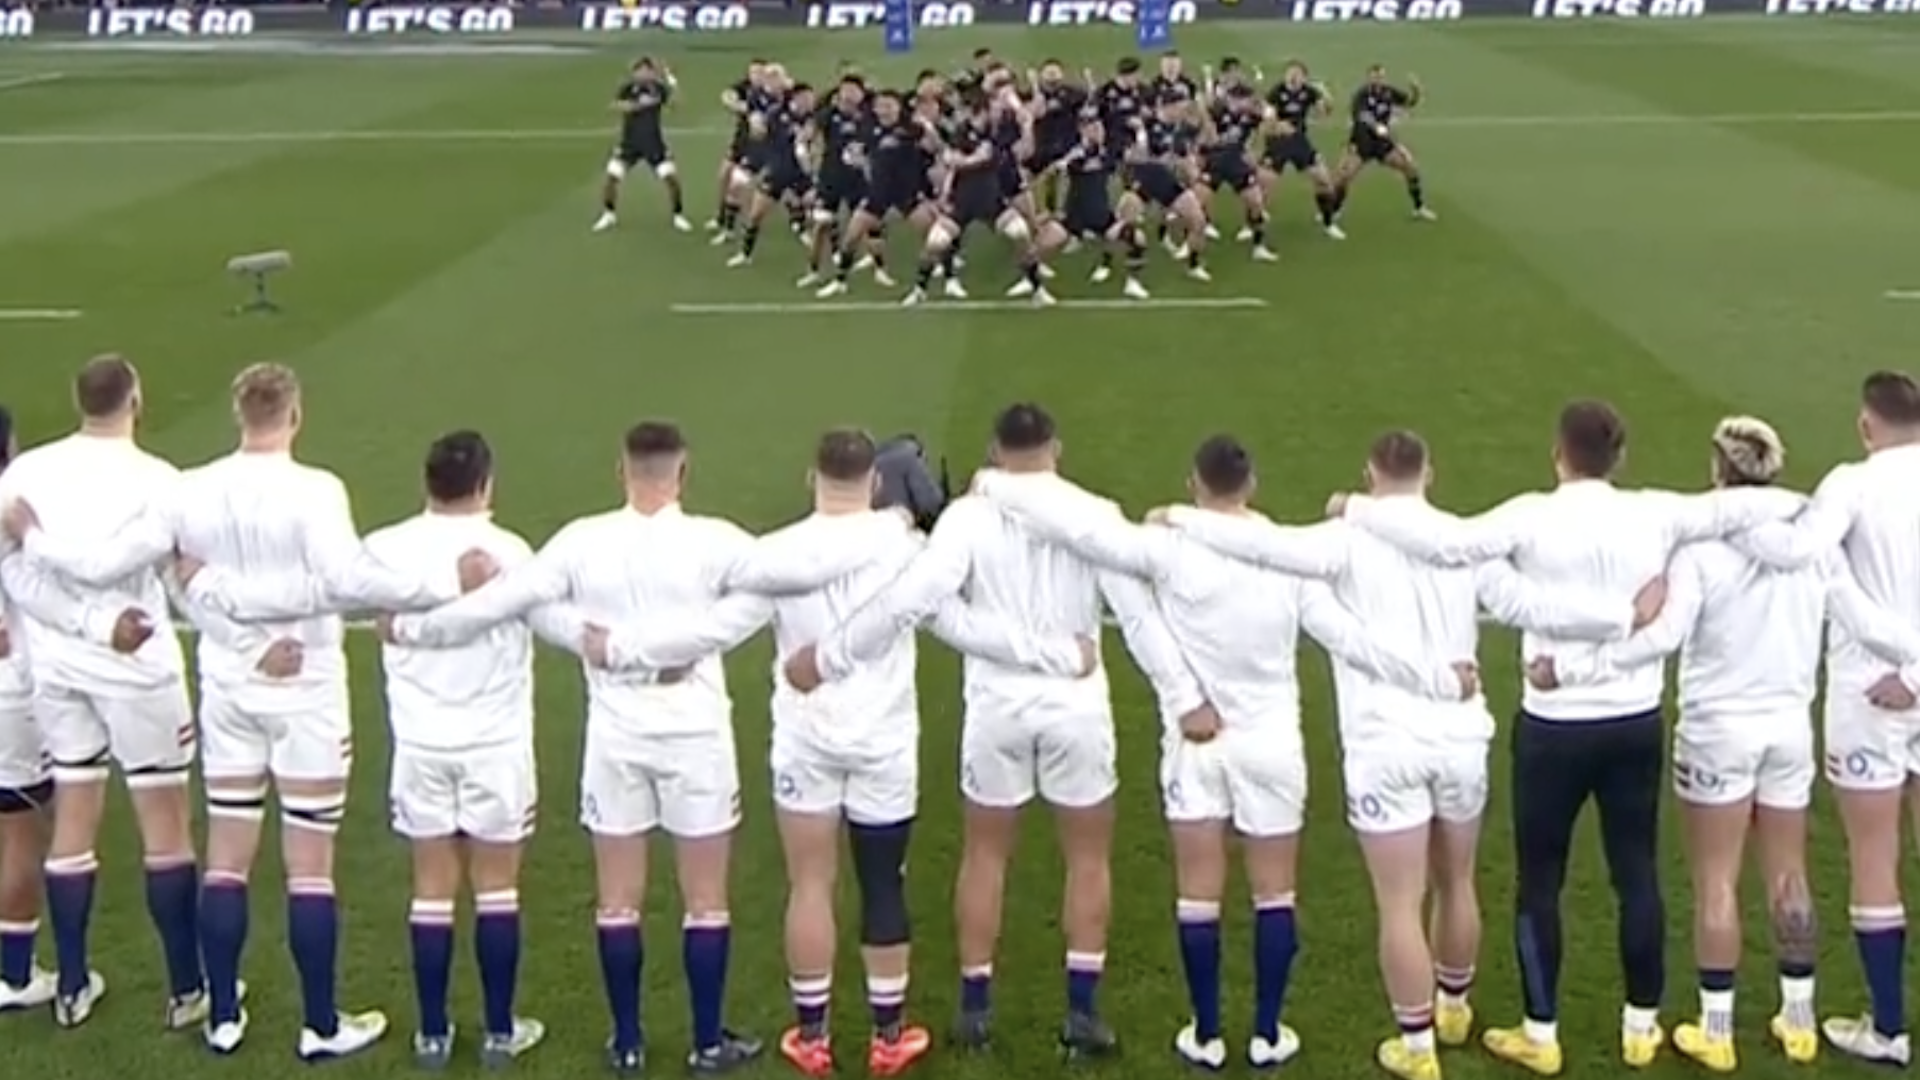 England face online backlash for response to haka